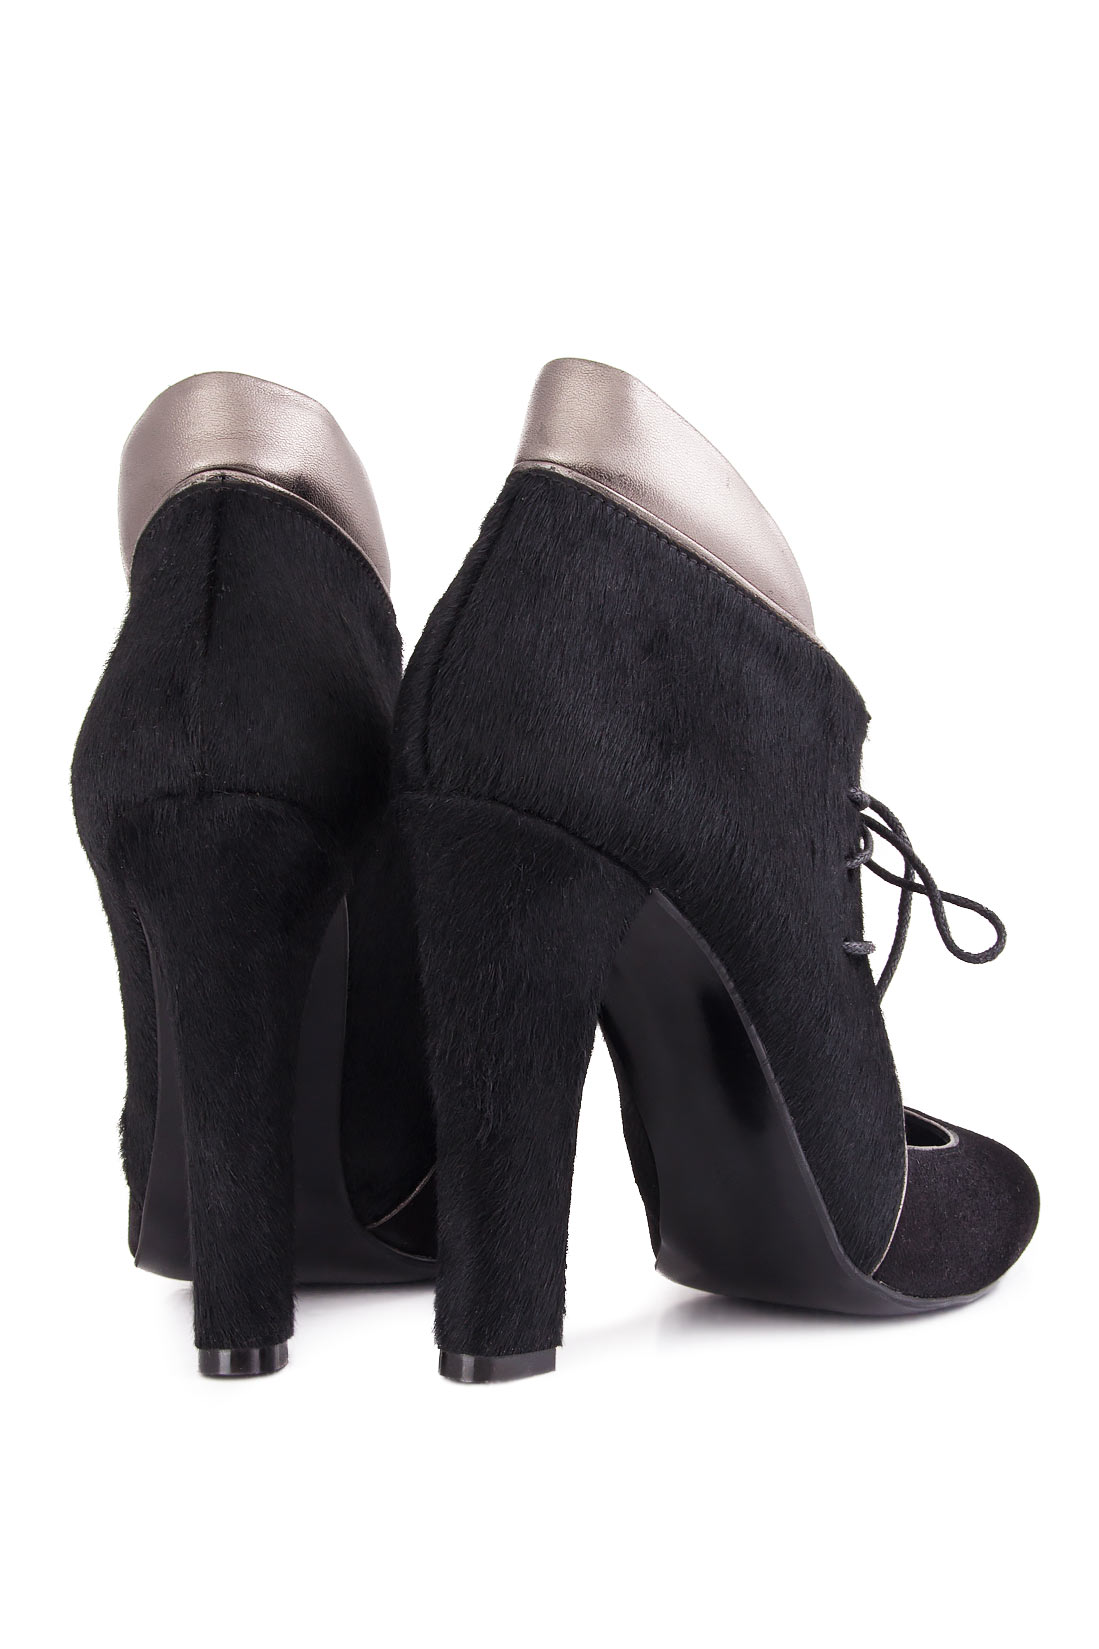 Suede ankle boots Ana Kaloni image 2